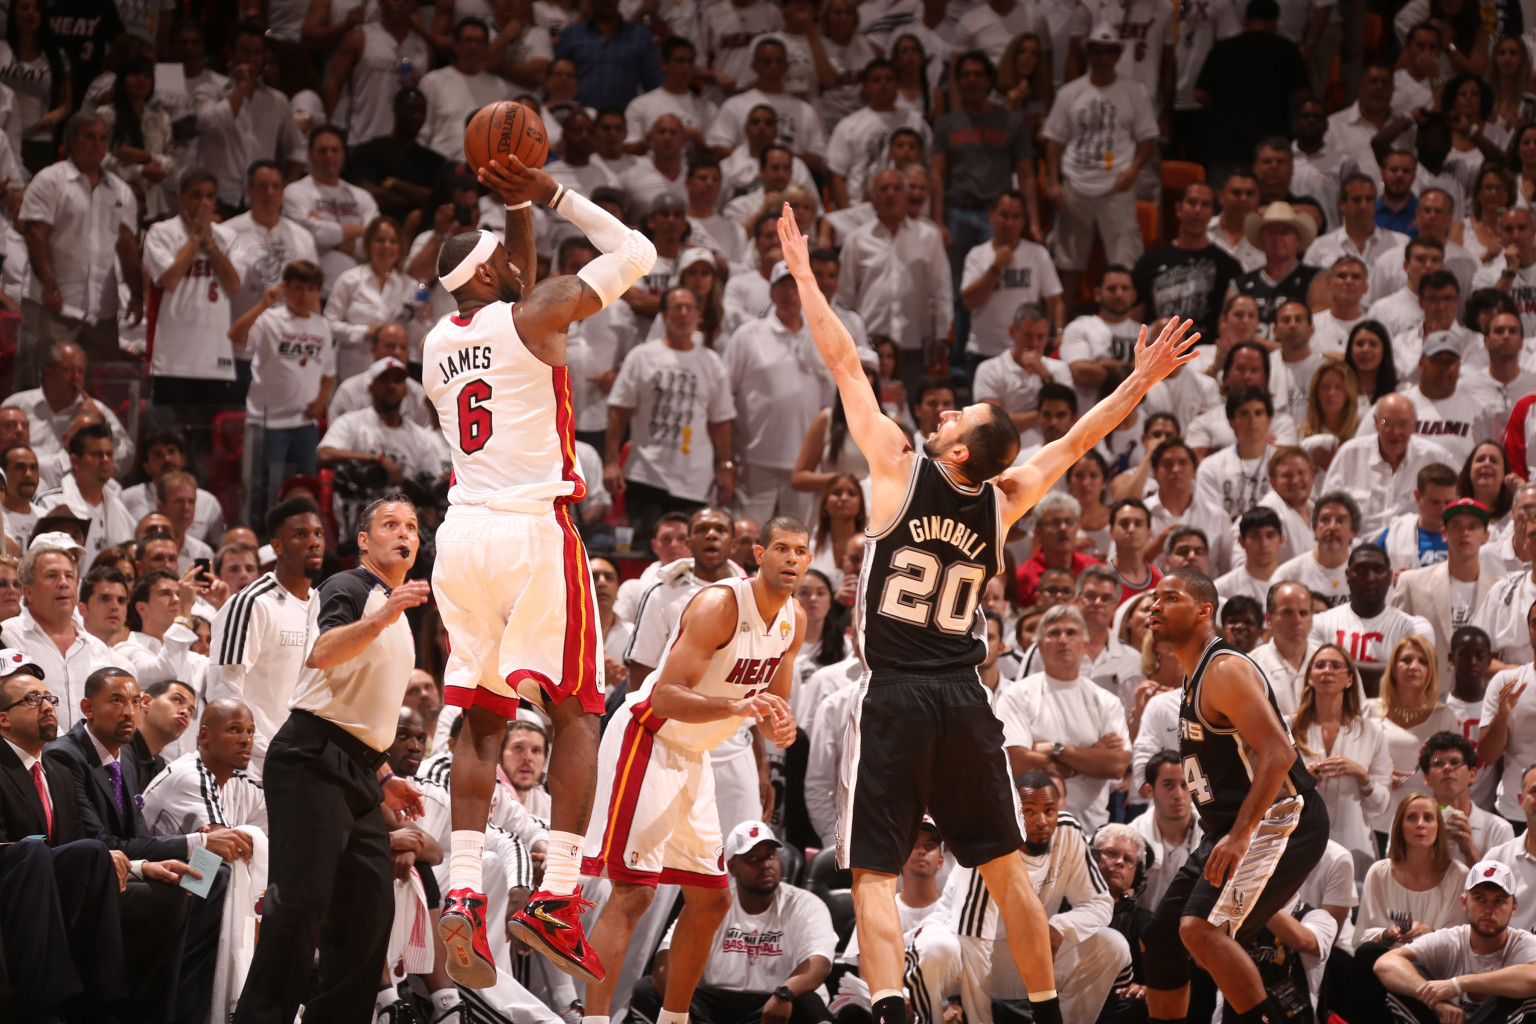 LeBron Game 7 GIF: Every Shot NBA Finals MVP Made In Final Game vs. Spurs | HuffPost